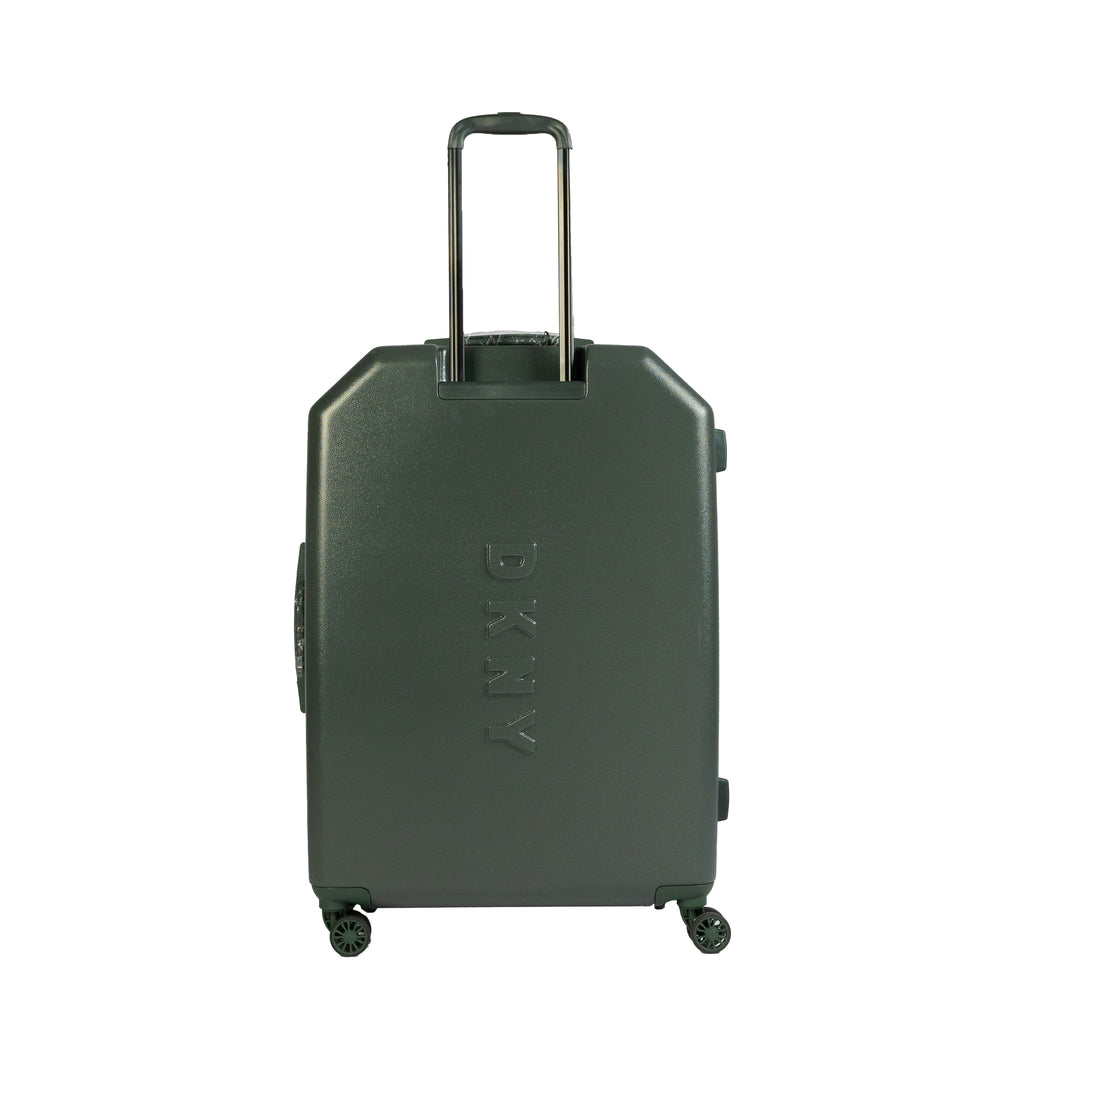 DKNY Green Large Luggage